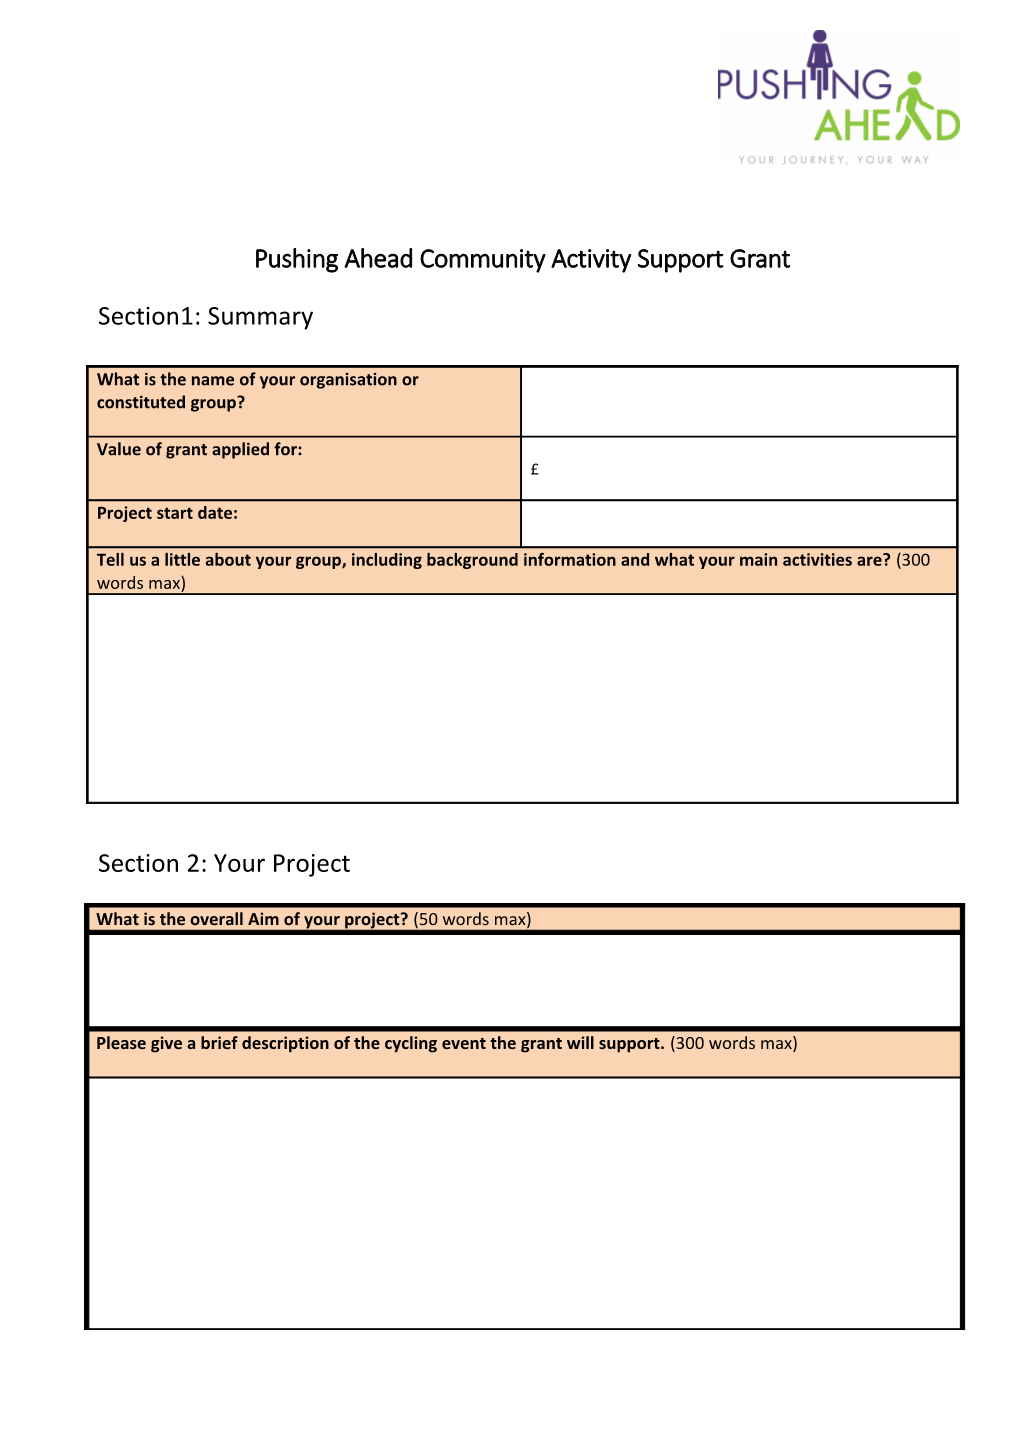 Pushing Ahead Community Activity Support Grant